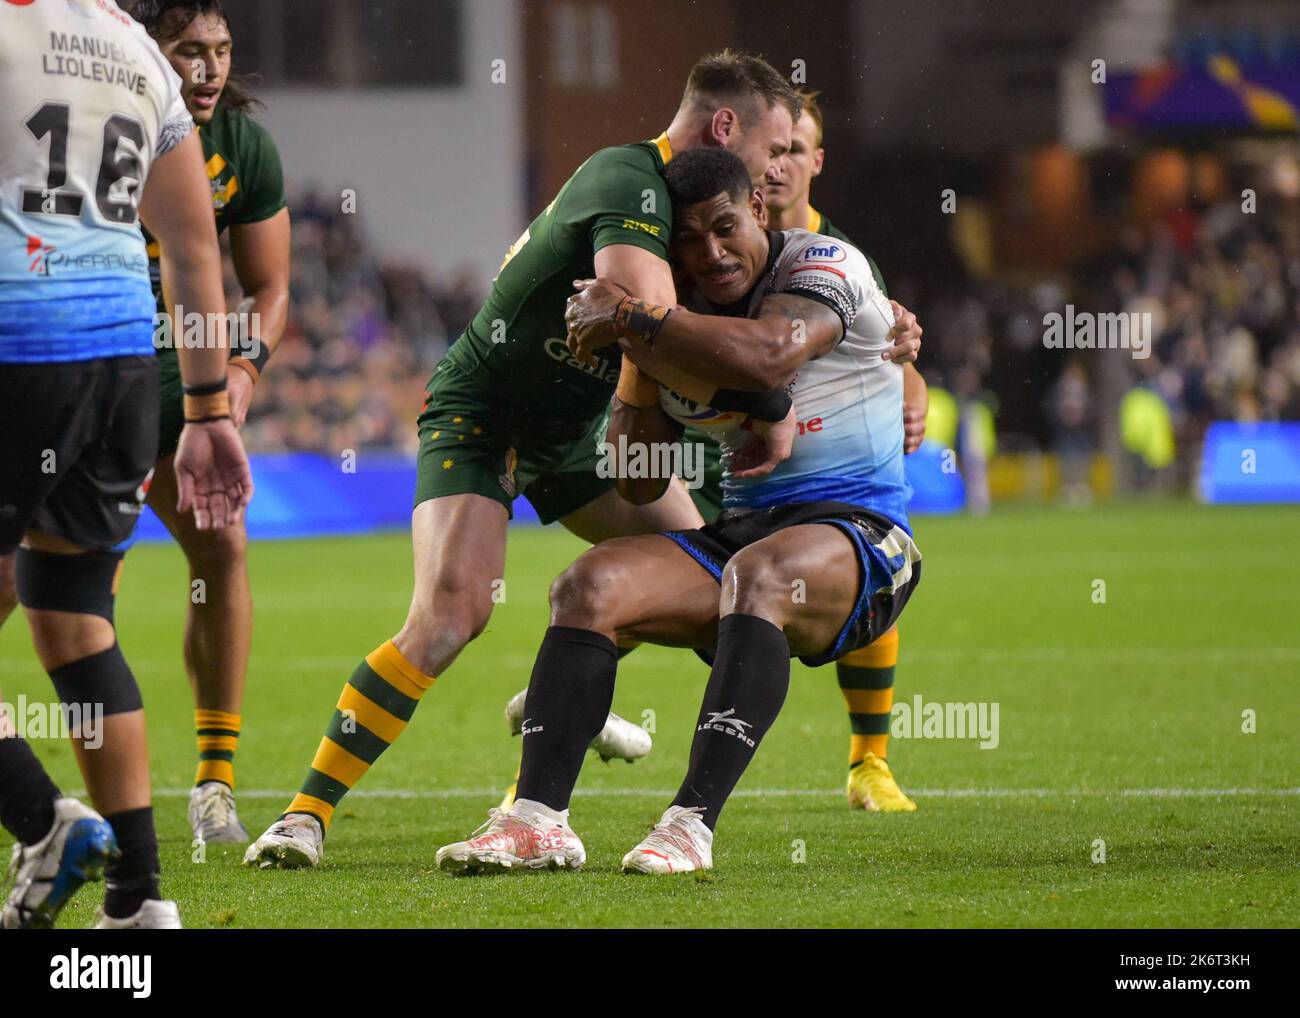 Australia v Fiji: Rugby League World Cup Headingley, Leeds, West Yorkshire  Fiji tackled during the Rugby League World Cup 2021 group B match between Australia v Fiji at Headingley Stadium, Leeds on October 15, 2022 . (Photo by Craig Cresswell/Alamy Live News) Stock Photo